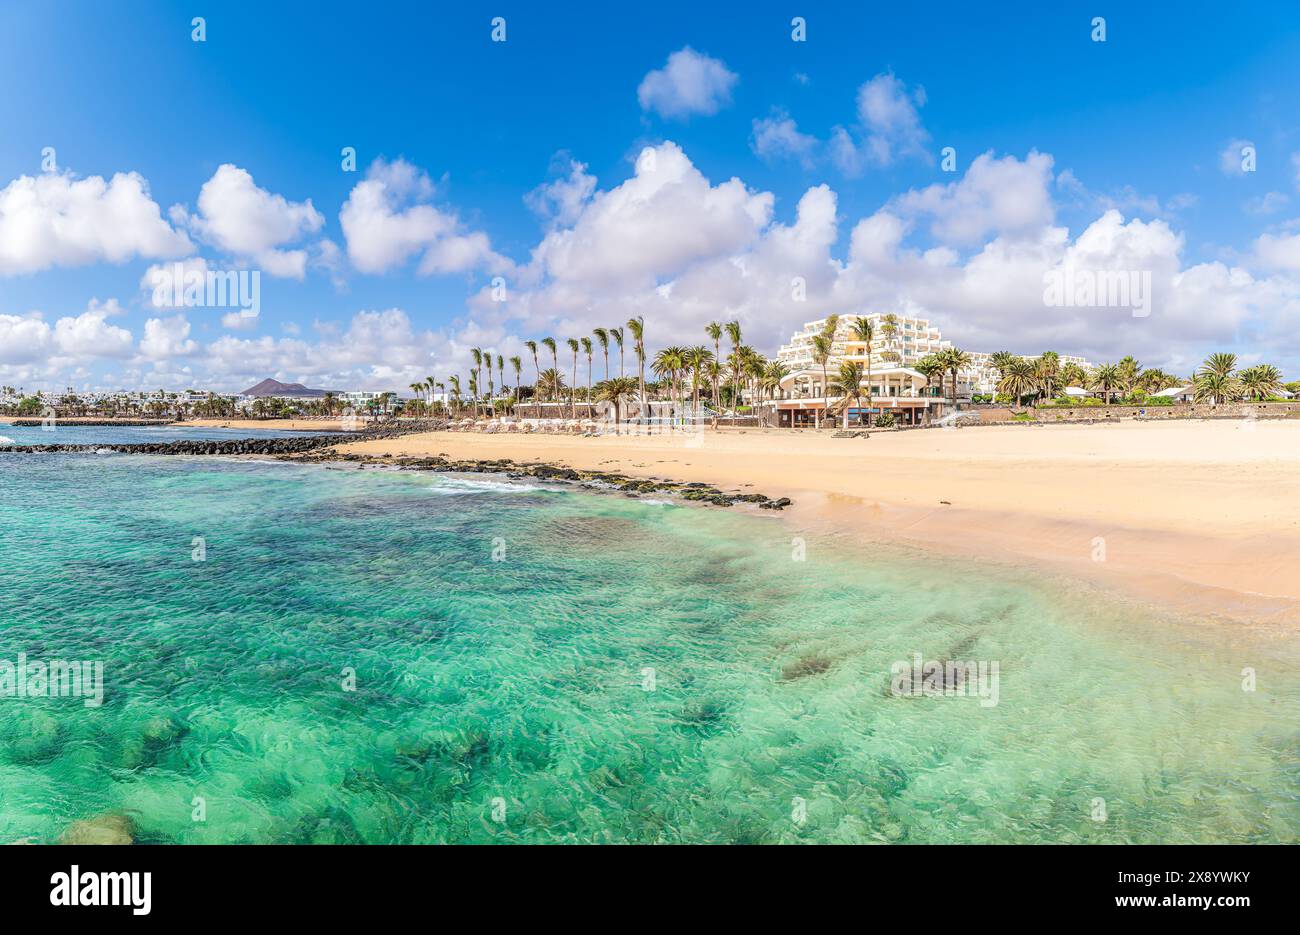 Playa de las Cucharas, Costa Teguise, Lanzarote: A perfect family beach with golden sand, turquoise waters, and a variety of water sports. Stock Photo